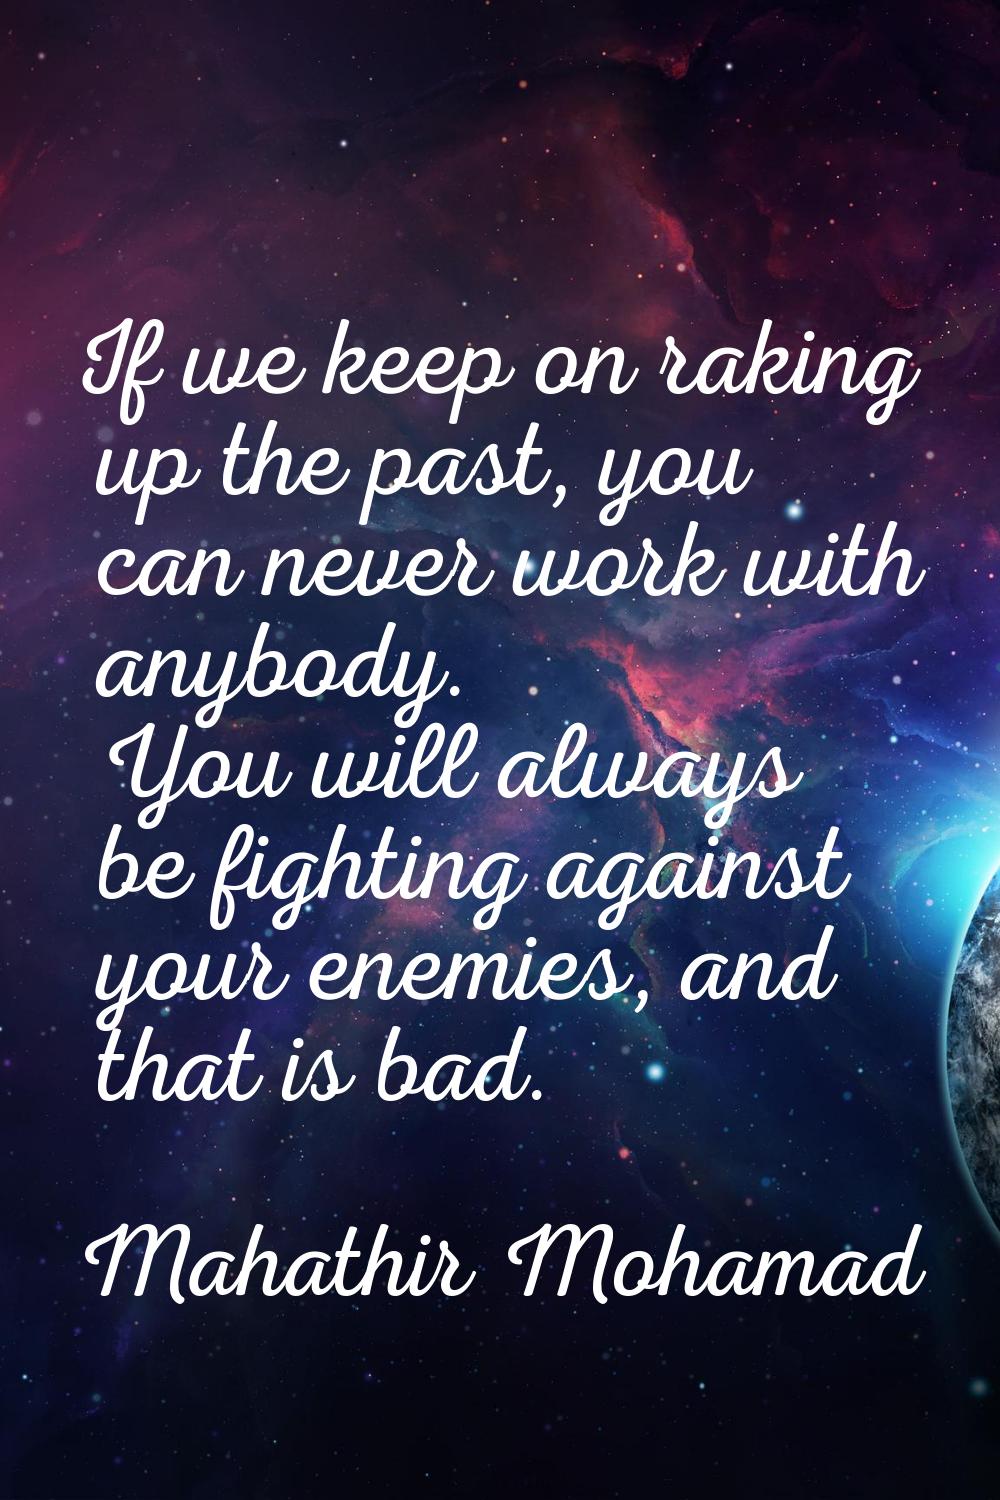 If we keep on raking up the past, you can never work with anybody. You will always be fighting agai